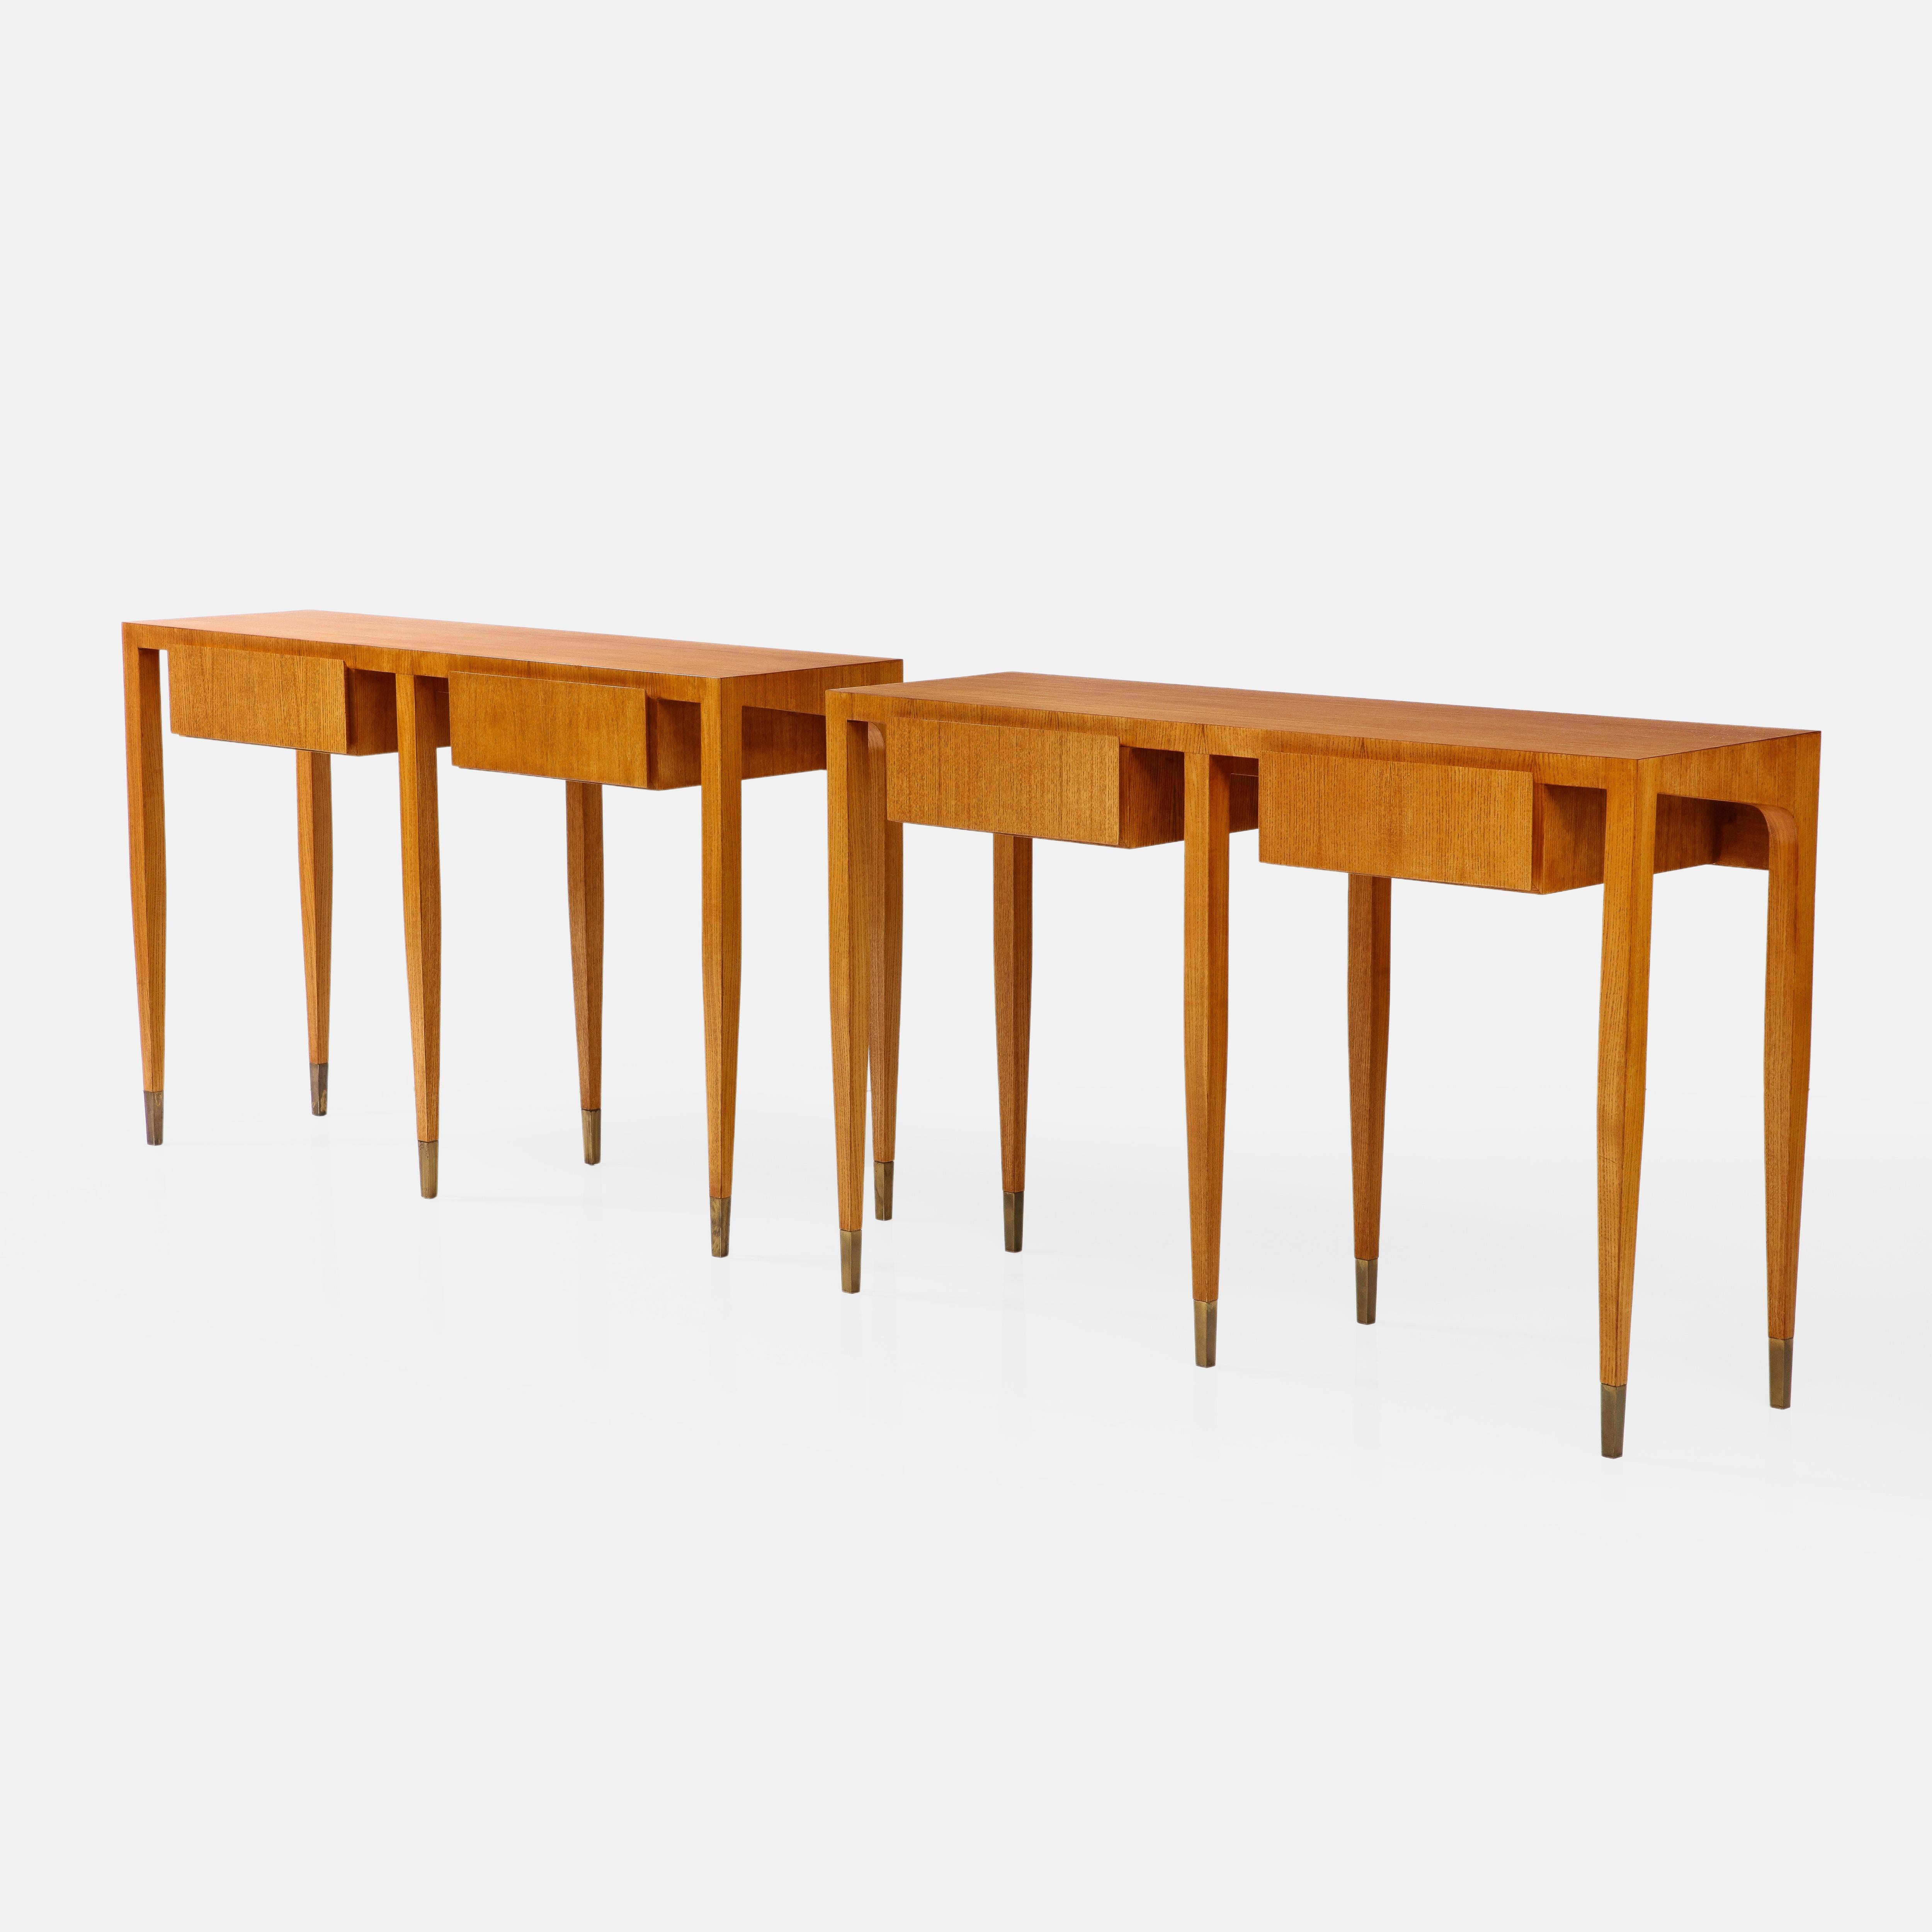 Gio Ponti for Giordano Chiesa rare and important pair of ash wood console tables each with two drawers and six legs ending in brass sabots, Italy, circa 1955.  These exquisite sculptural consoles have fine details throughout and clean architectural